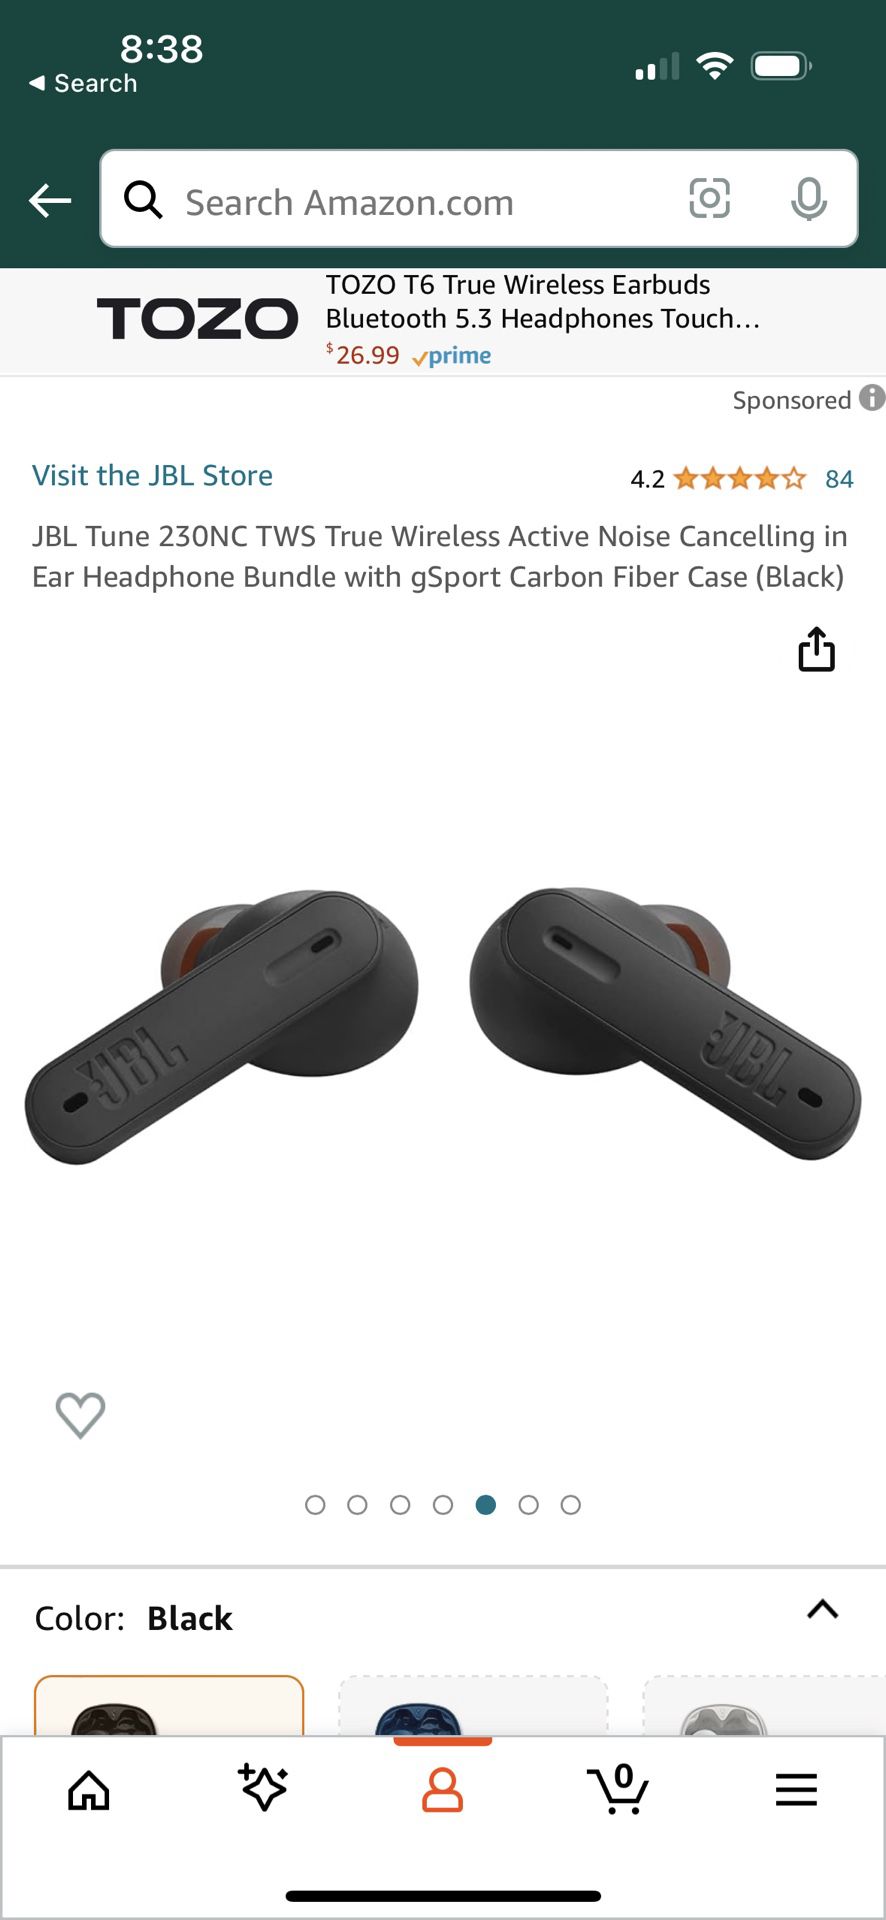 JBL Tune 230NC TWS True Wireless Active Noise Cancelling in Ear Headphone Bundle with gSport Carbon Fiber Case (Black)